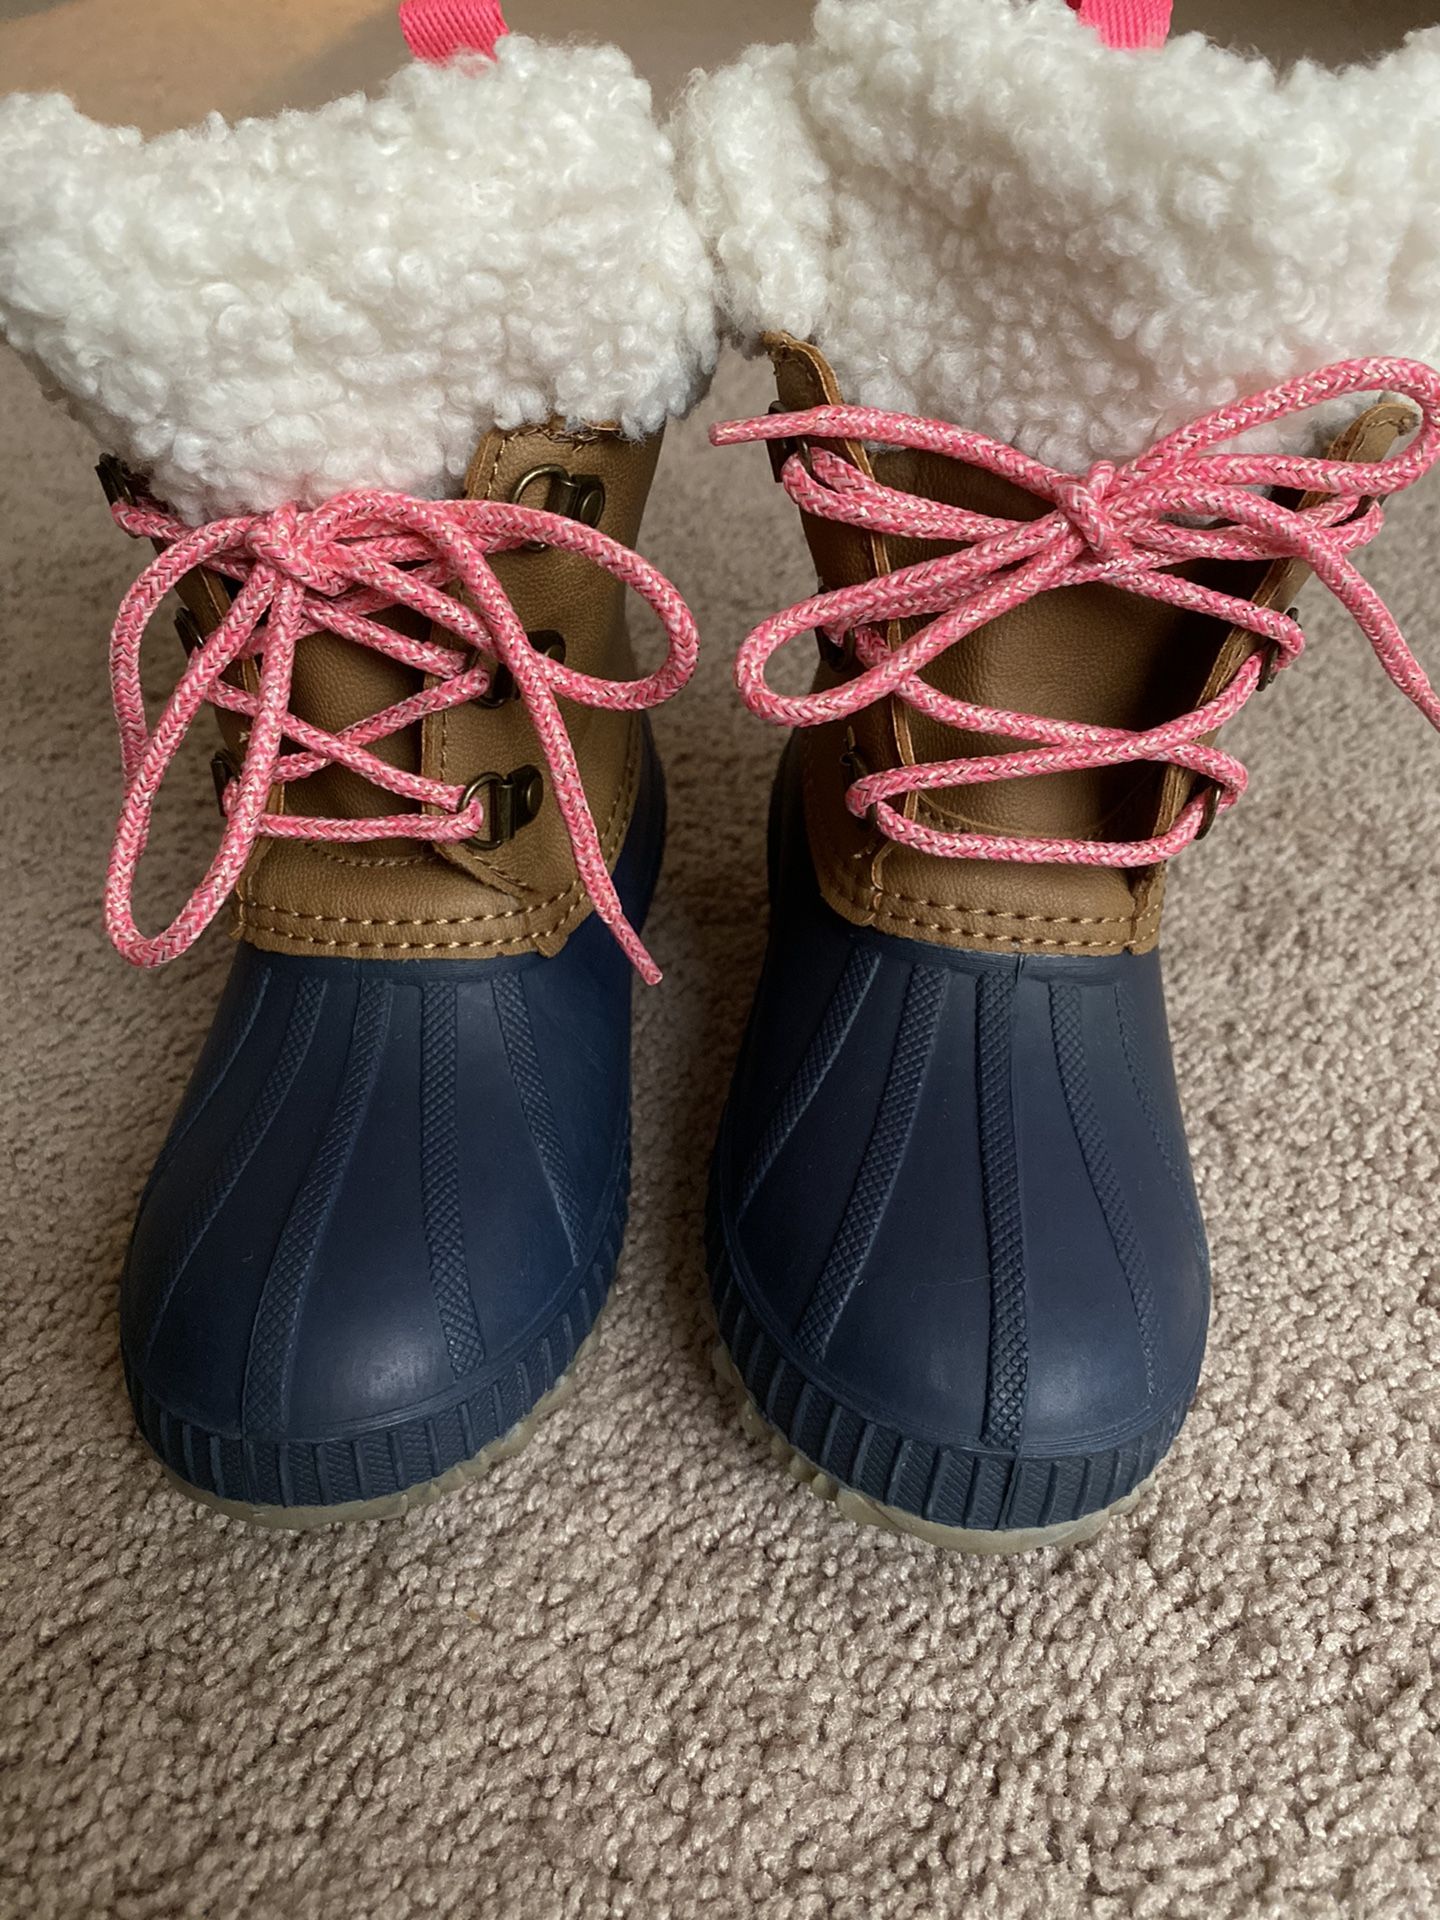 Snow boots size 10/11